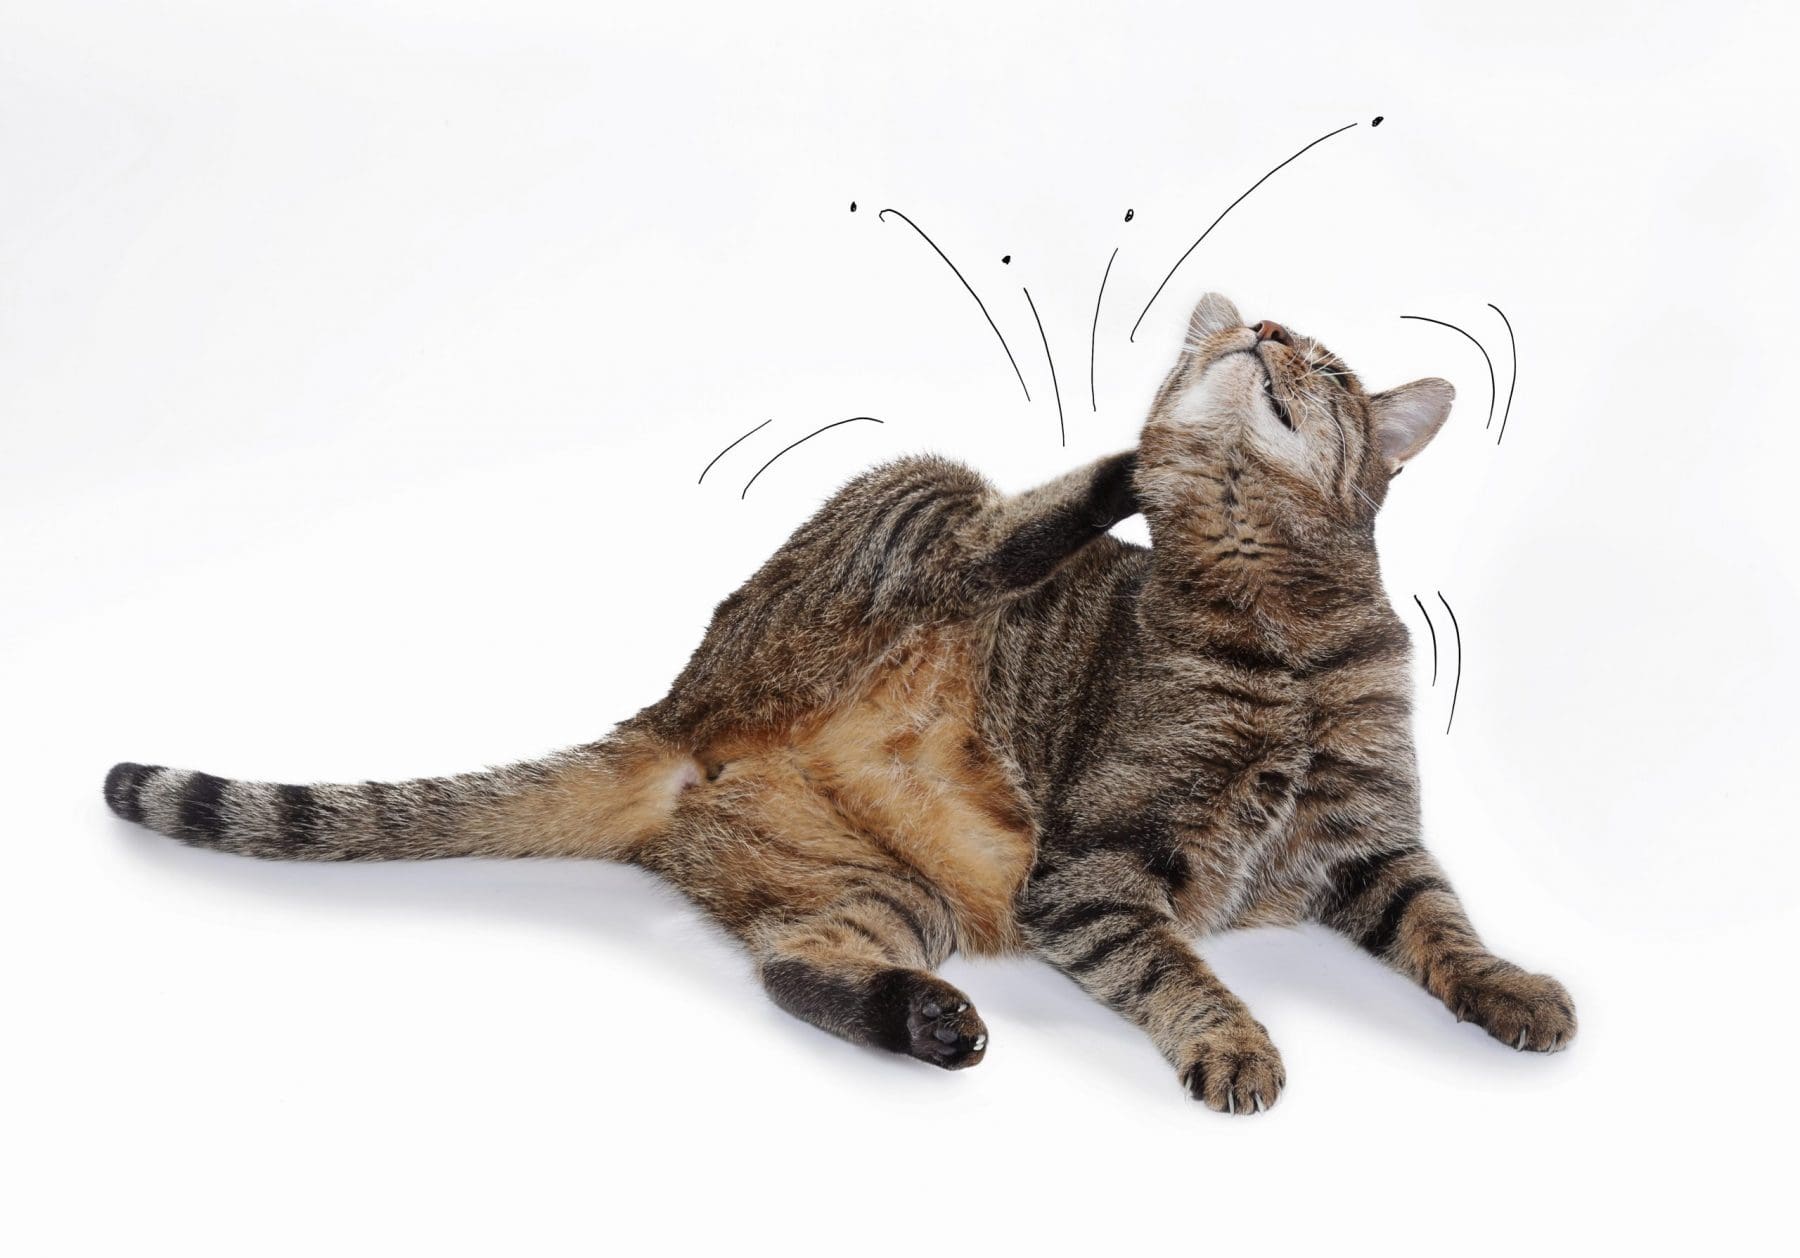 A cat scratching itself in front of a white background